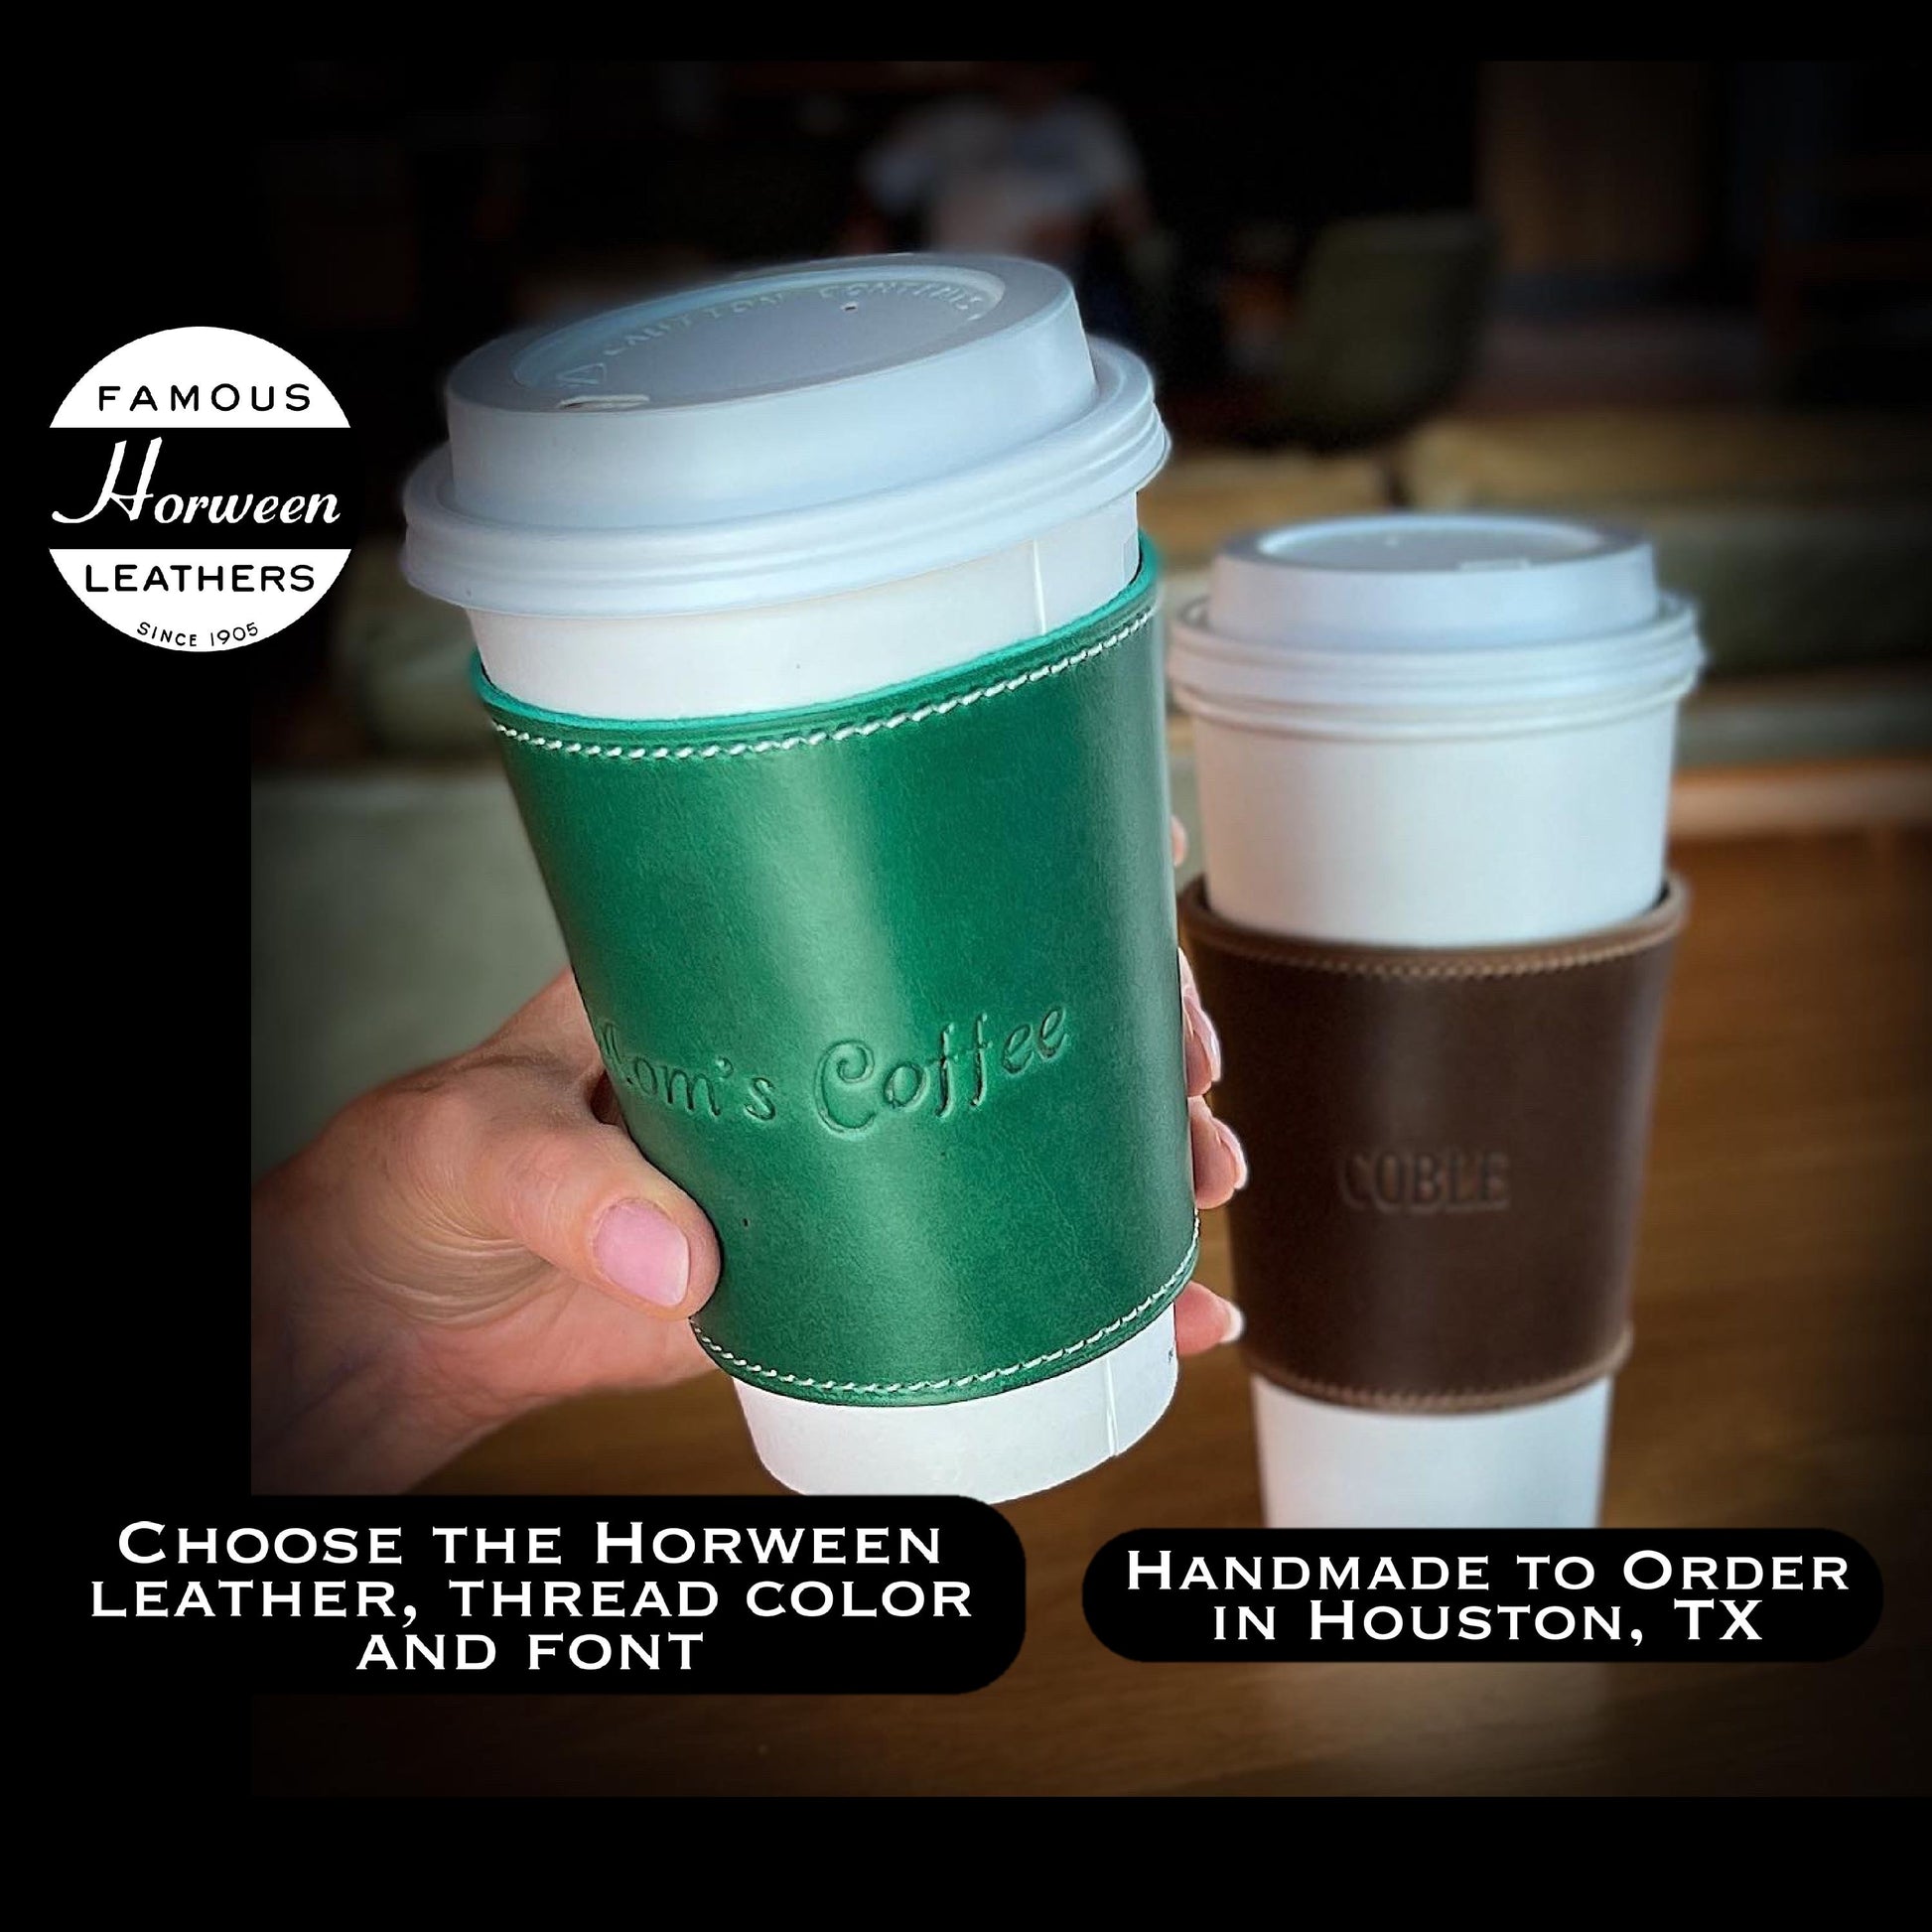 Handmade Personalized Coffee Cup Sleeve in Horween leather.  Handmade to Order in Houston, TX.  Fits Starbucks Grande, Venti and similar sized cups.